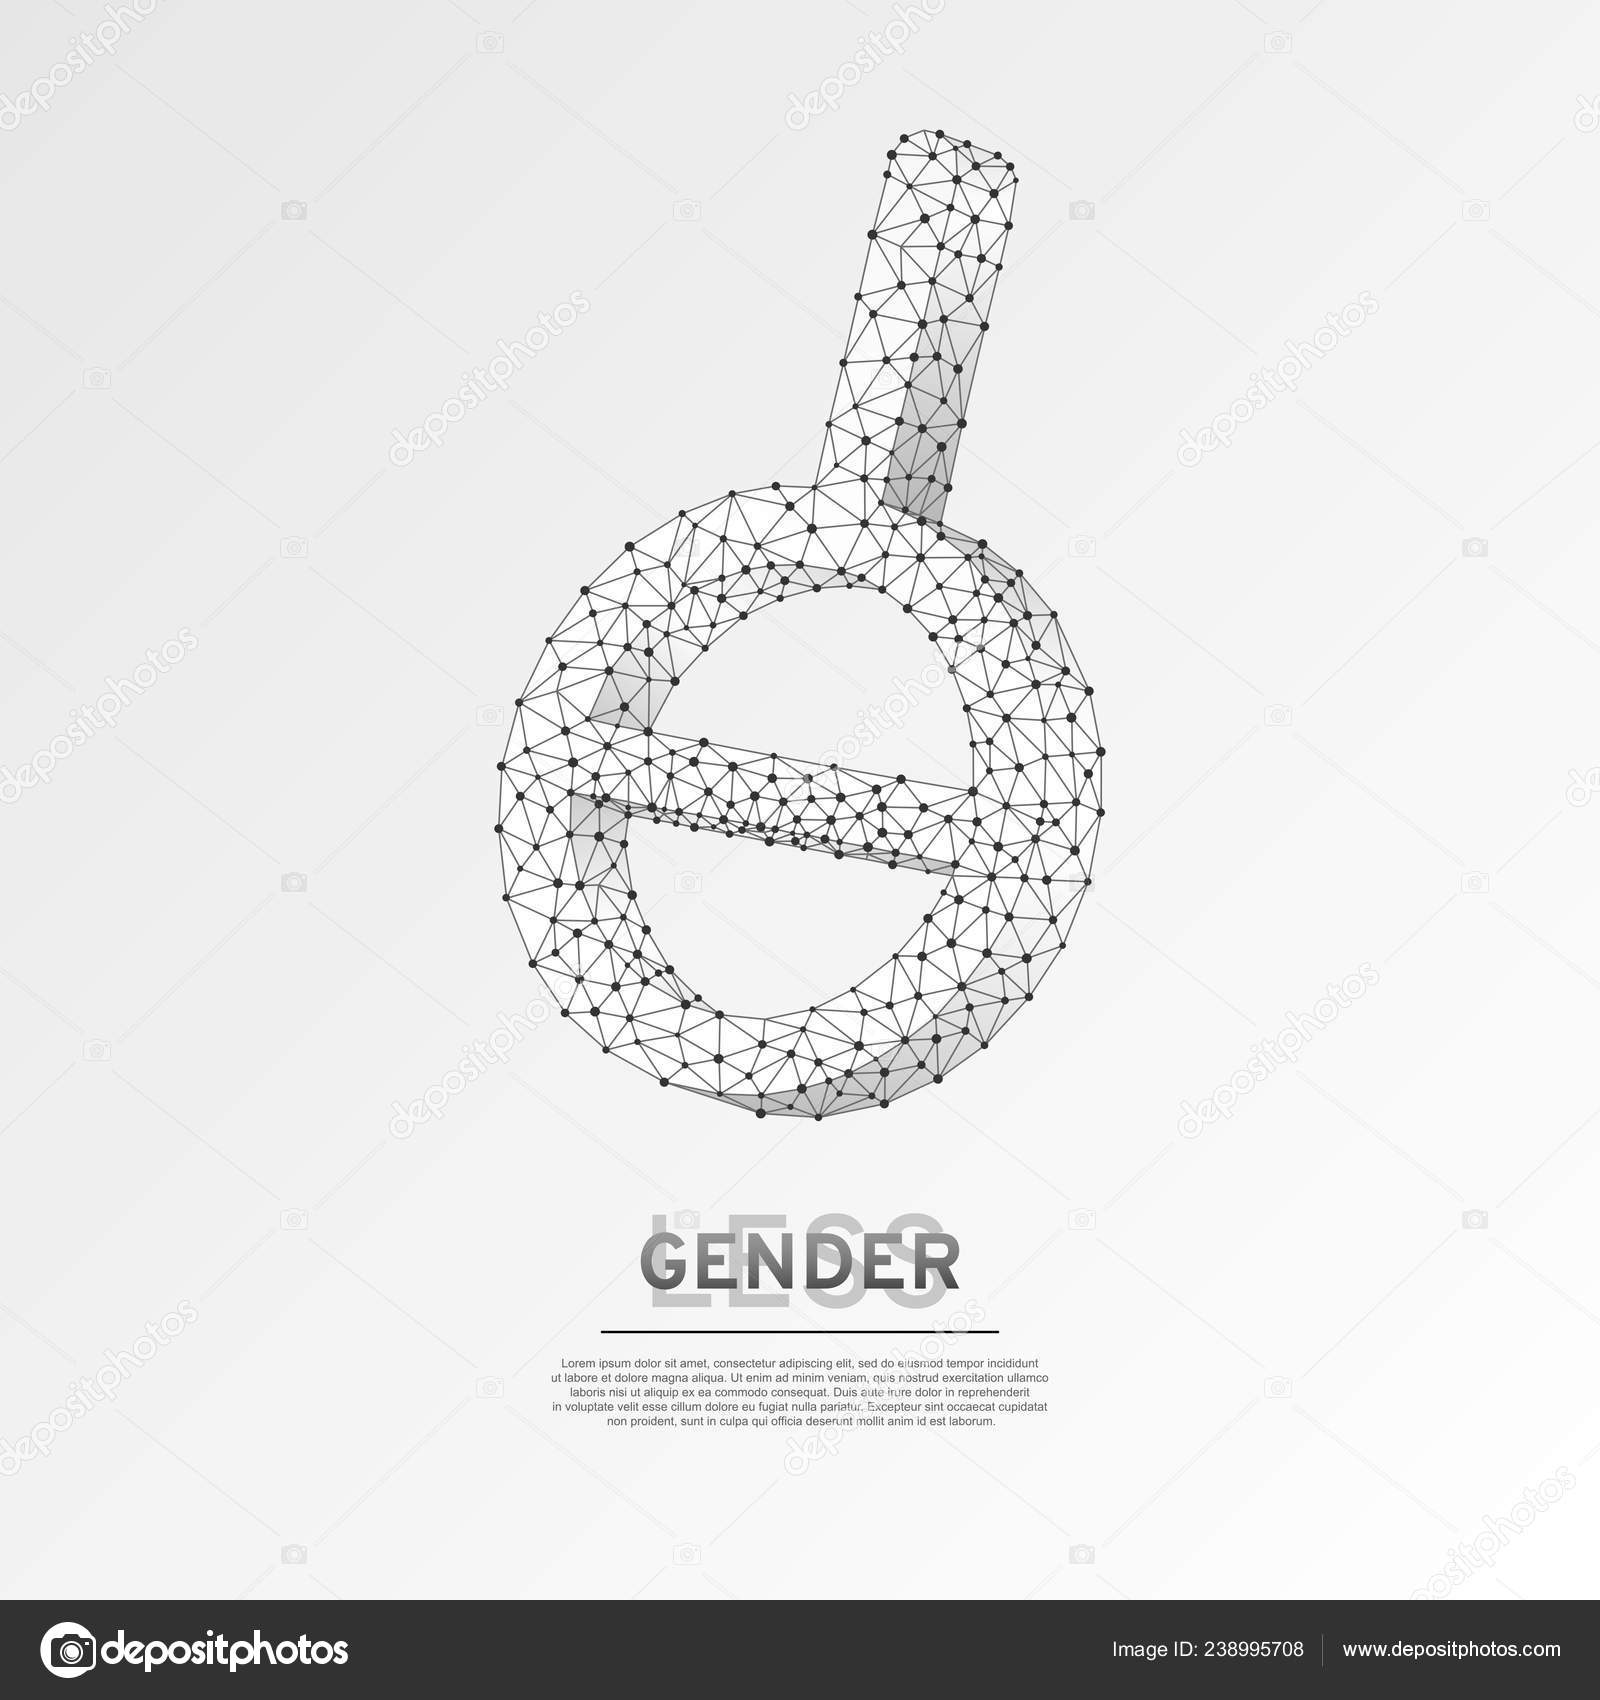 Agender Asexual Symbol Wireframe Digital 3d Illustration Low Poly Neutrally Genderless People Concept On White Background Abstract Vector Polygonal Origami Style Lgbt Sign Rgb Color Mode Vector Image By C Nosferatys19 Gmail Com